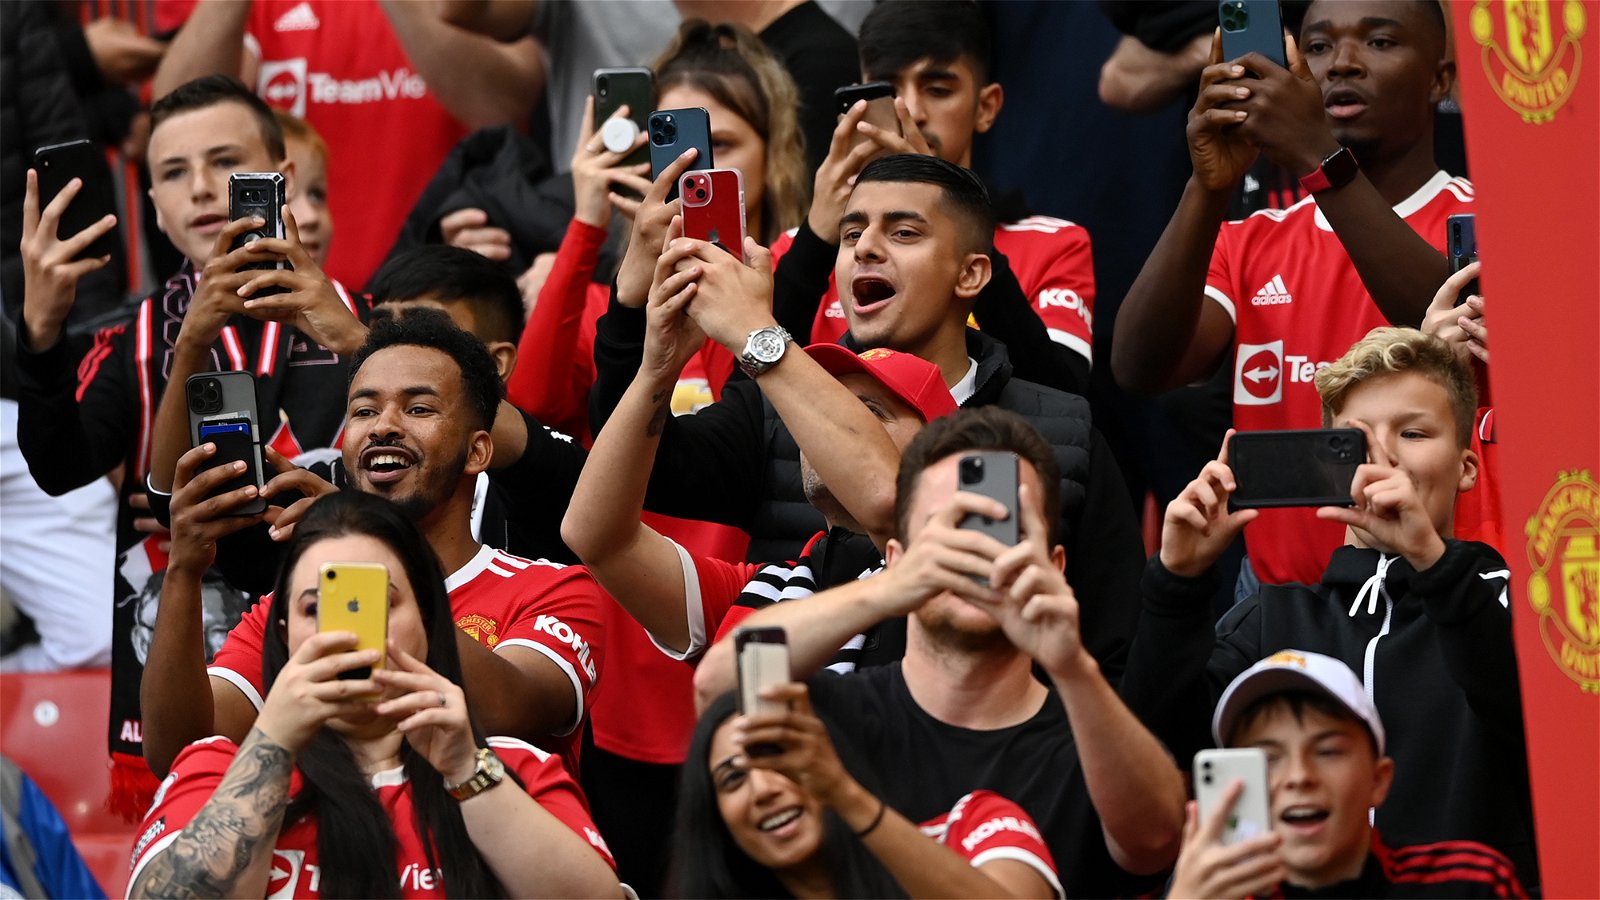 Are Manchester United fans even worse than the Mackems?